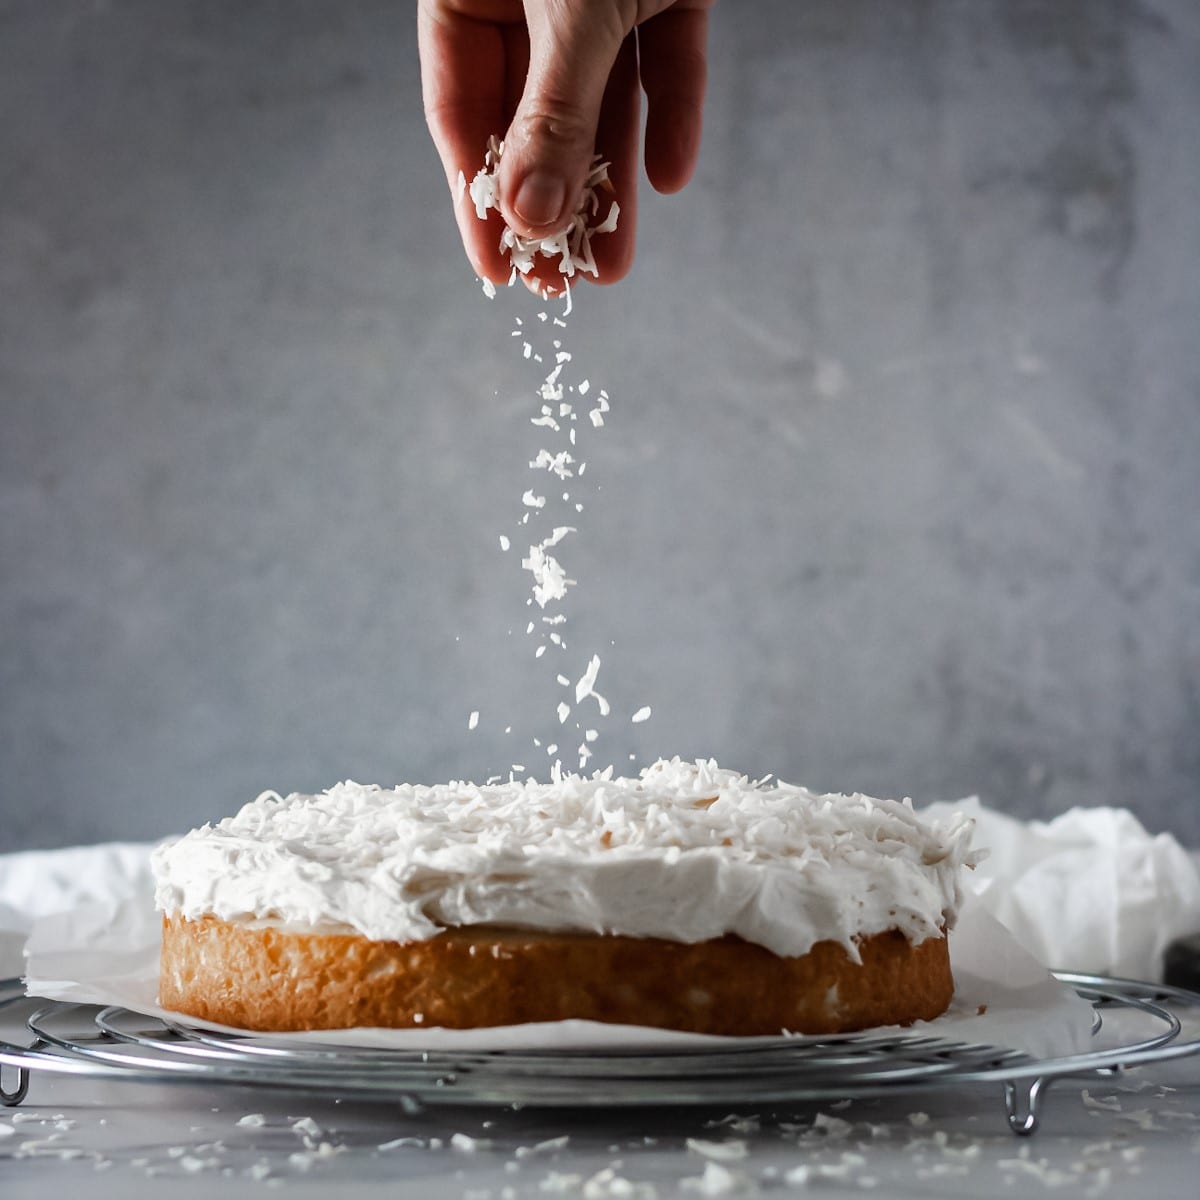 Front view of coconut being sprinkled on a Raffaello cake